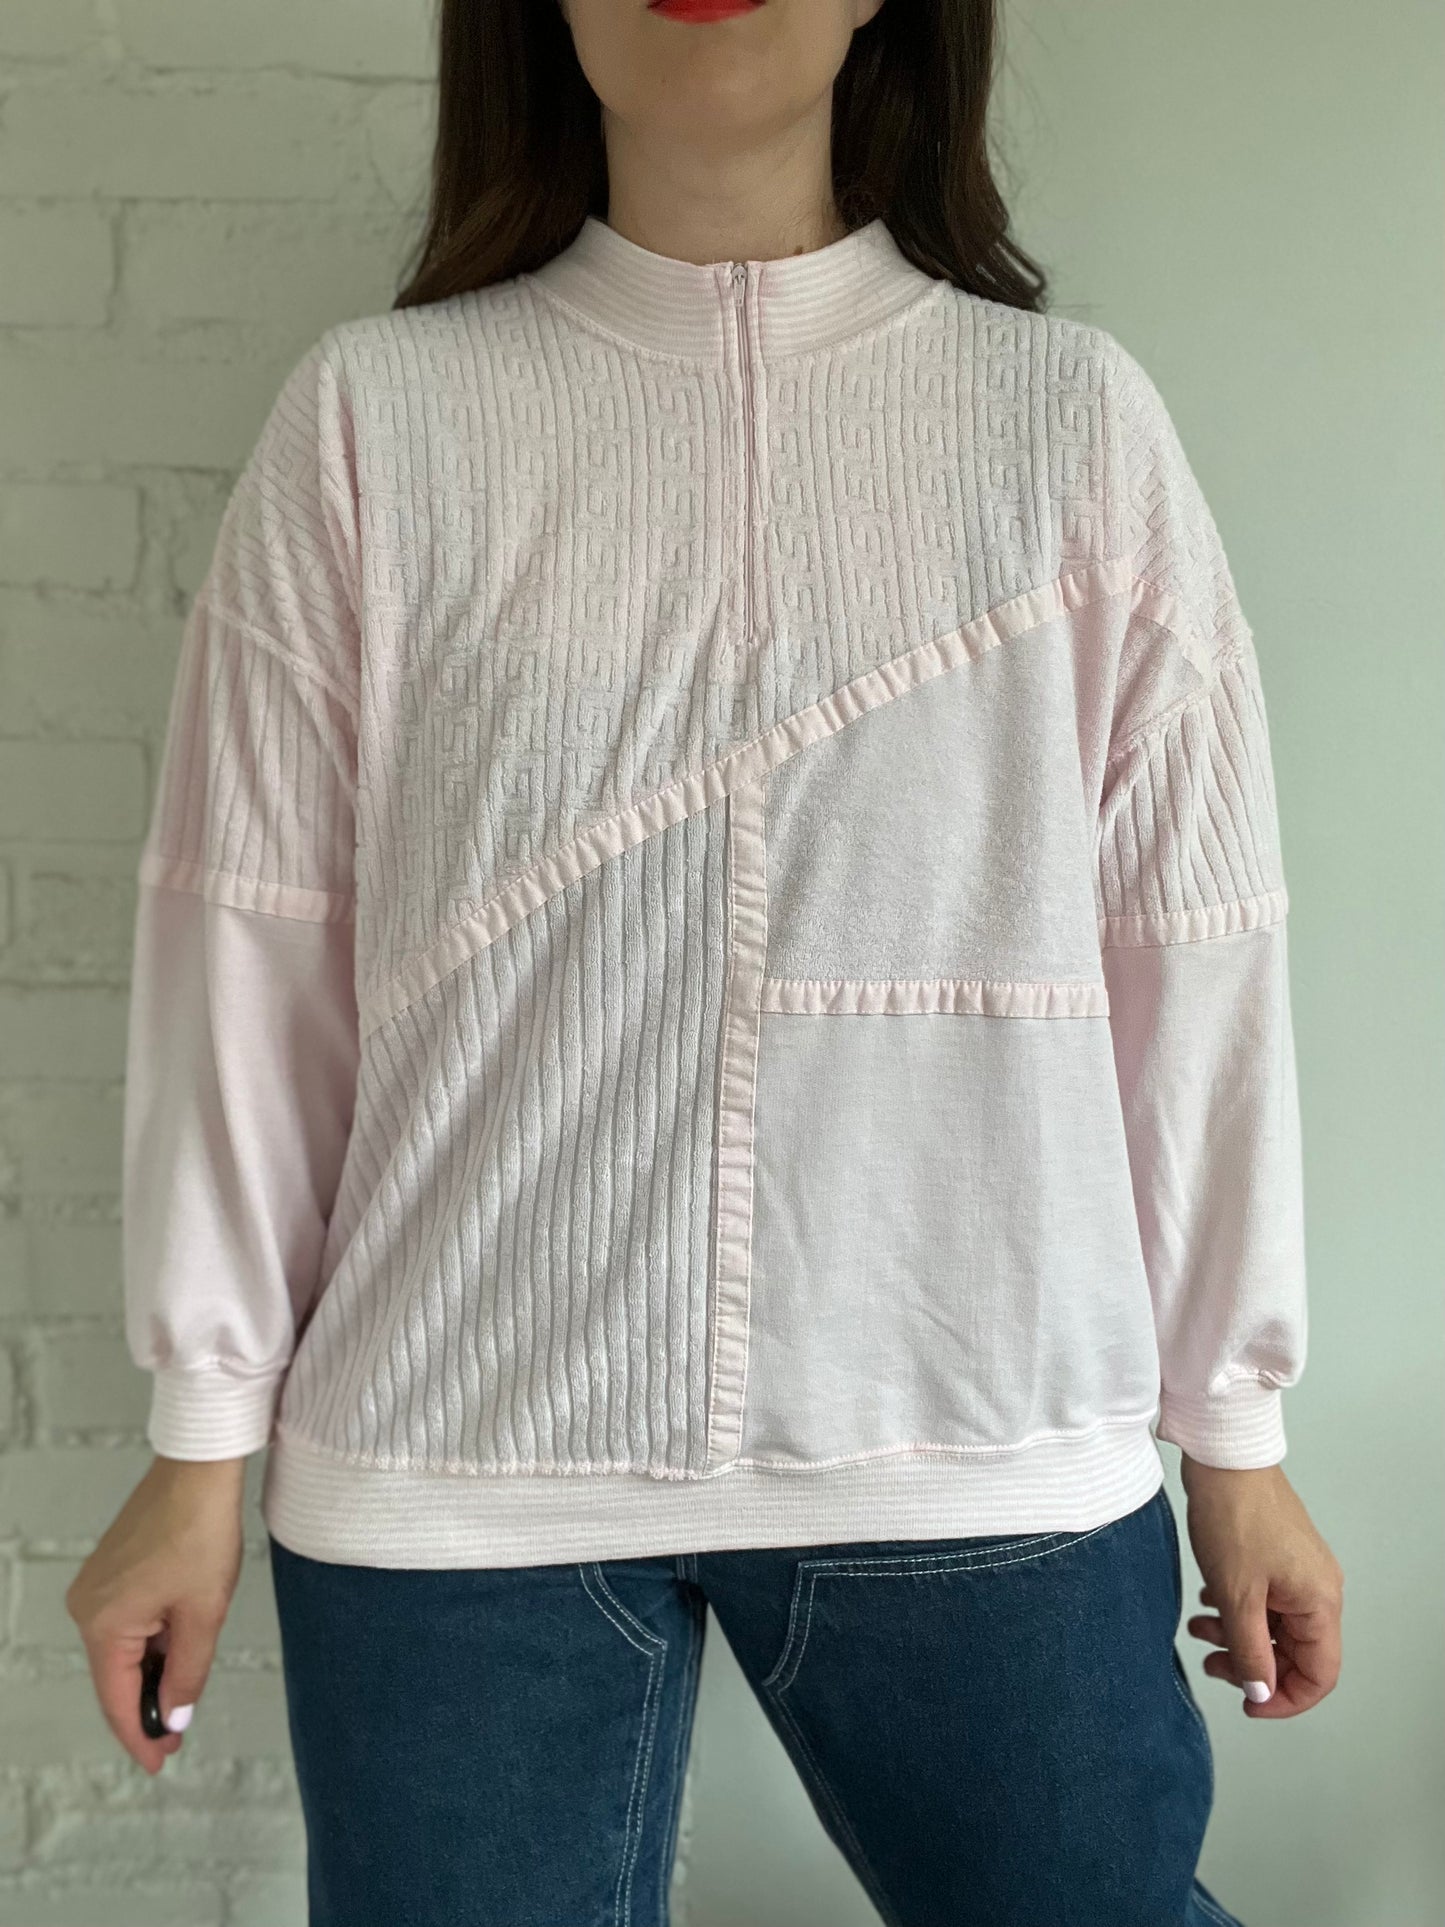 Sporty Terry Cloth Pullover Sweater - XL